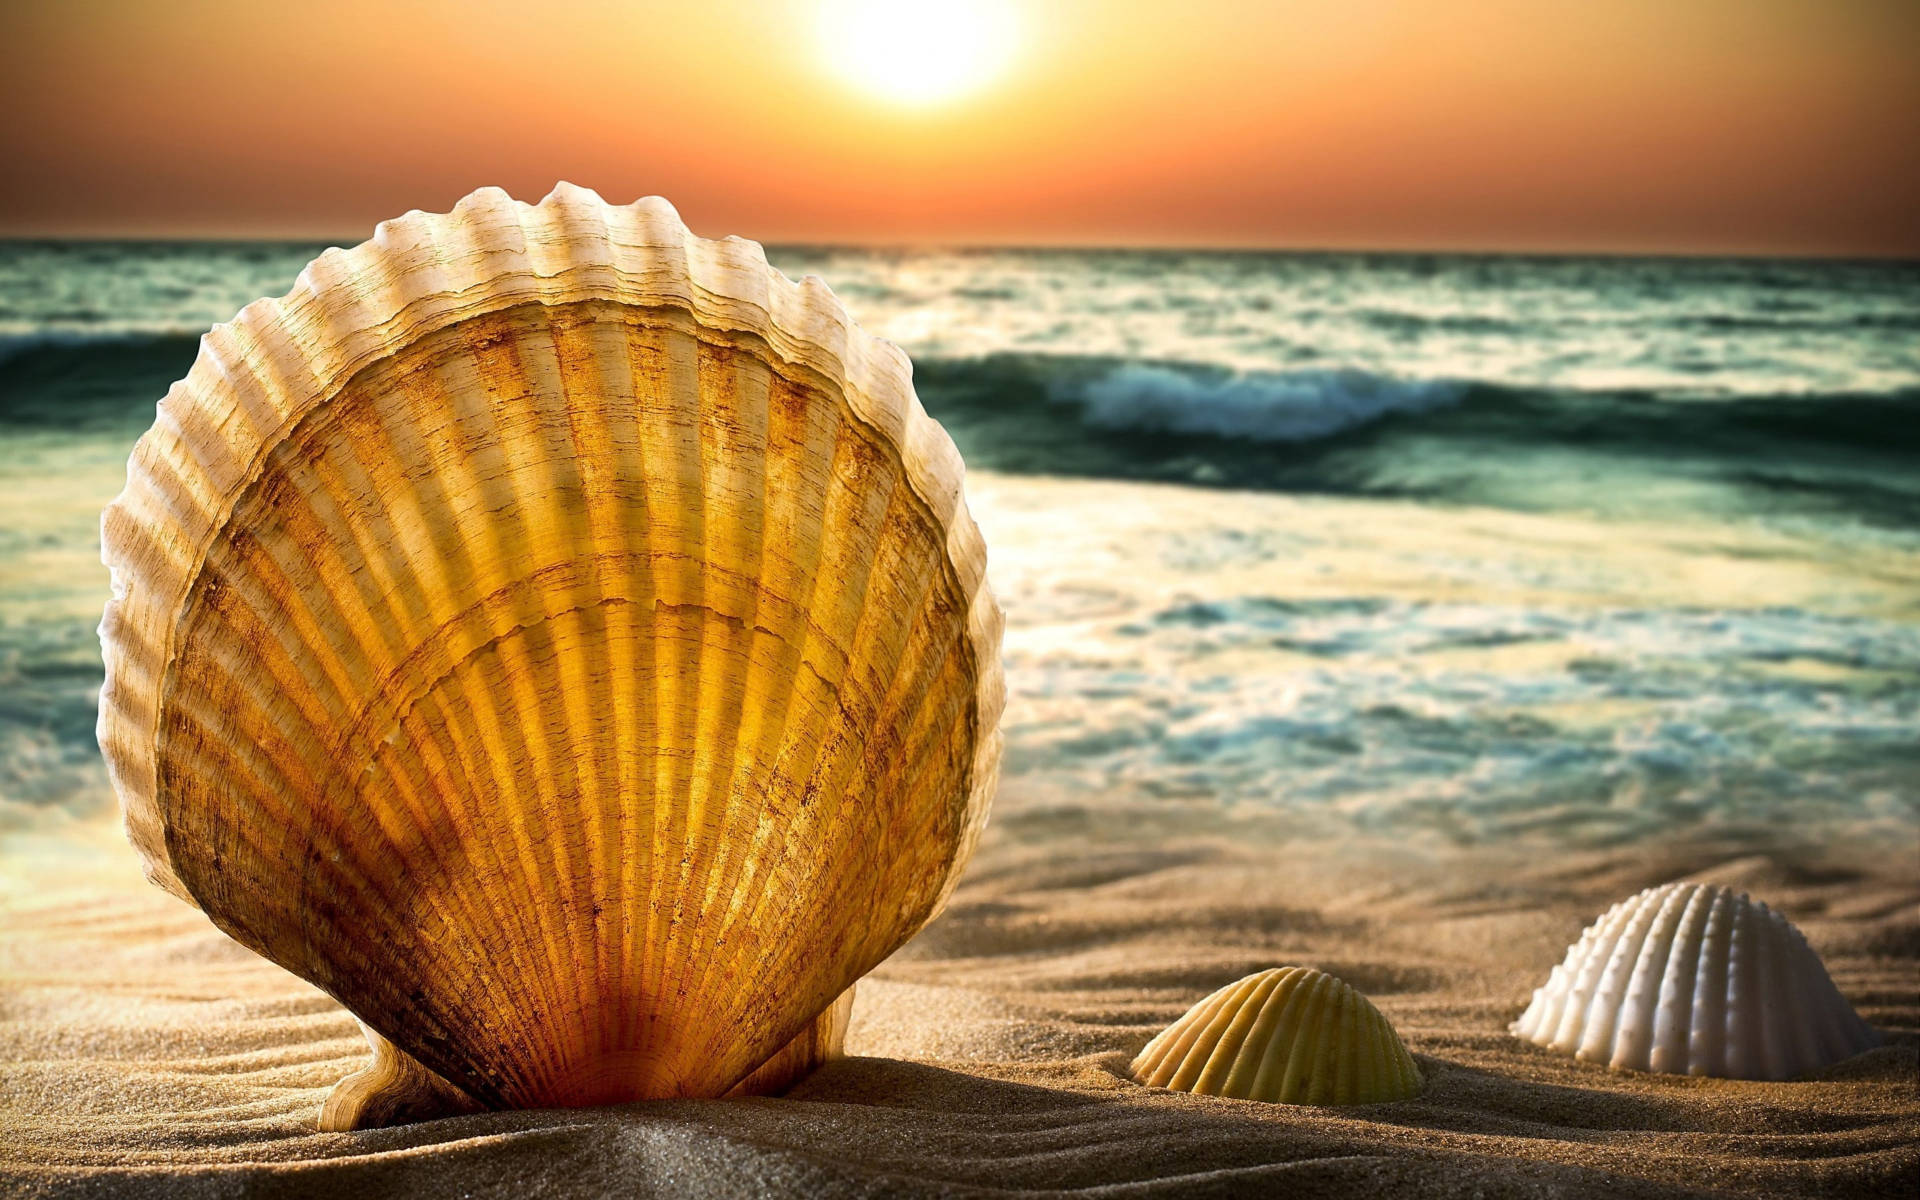 Beach Sunset With Shells Background